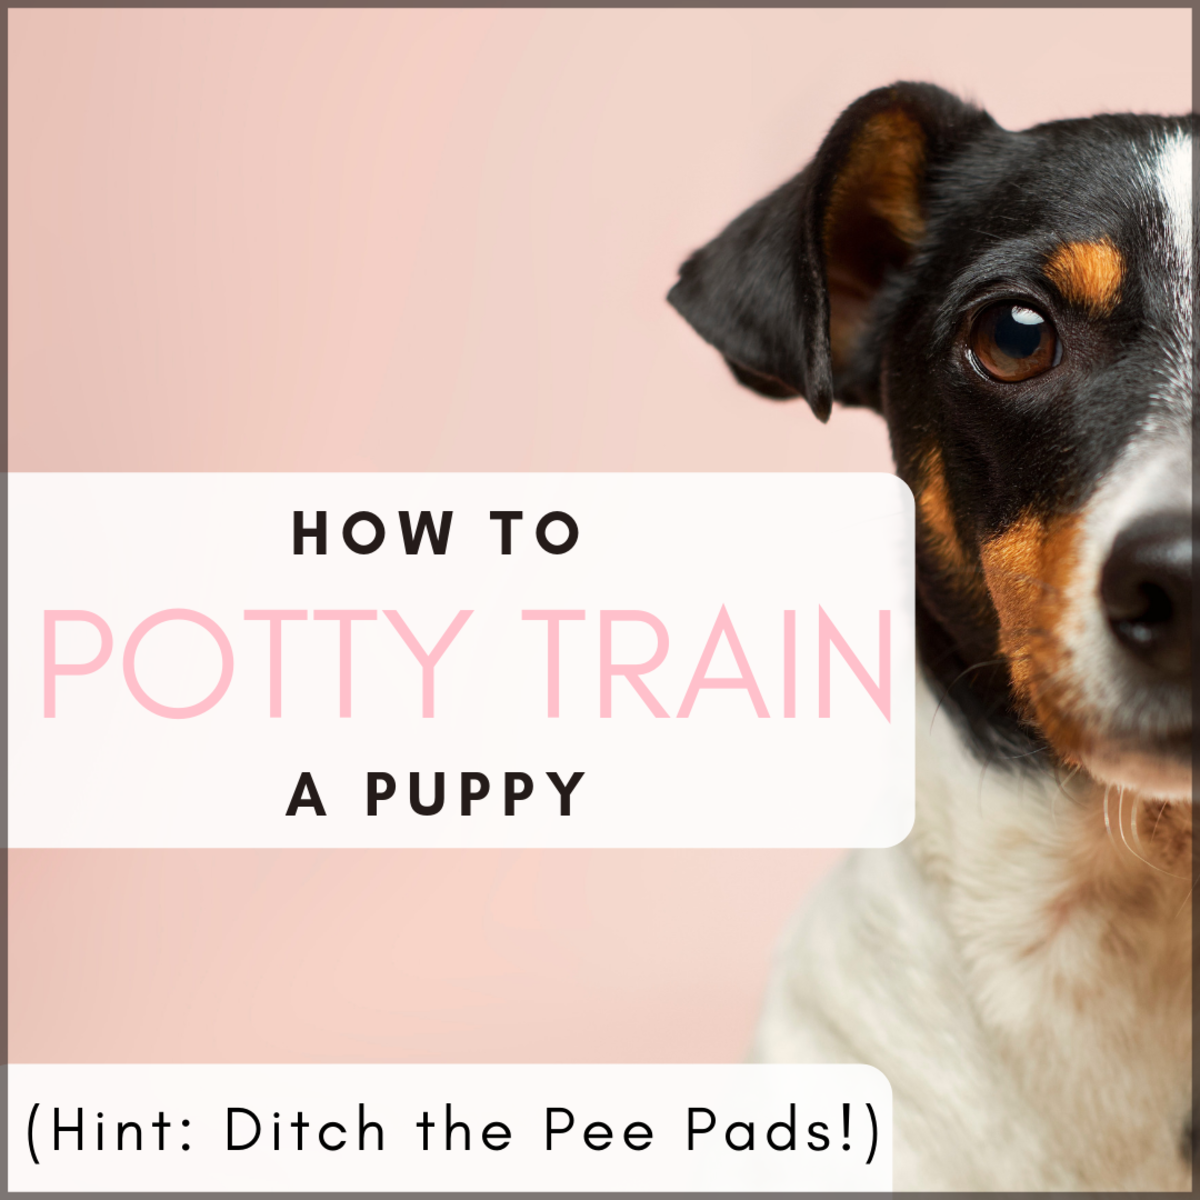 Pee pads may seem like an easy solution to potty training your puppy, but they end up reinforcing the wrong behaviors. 